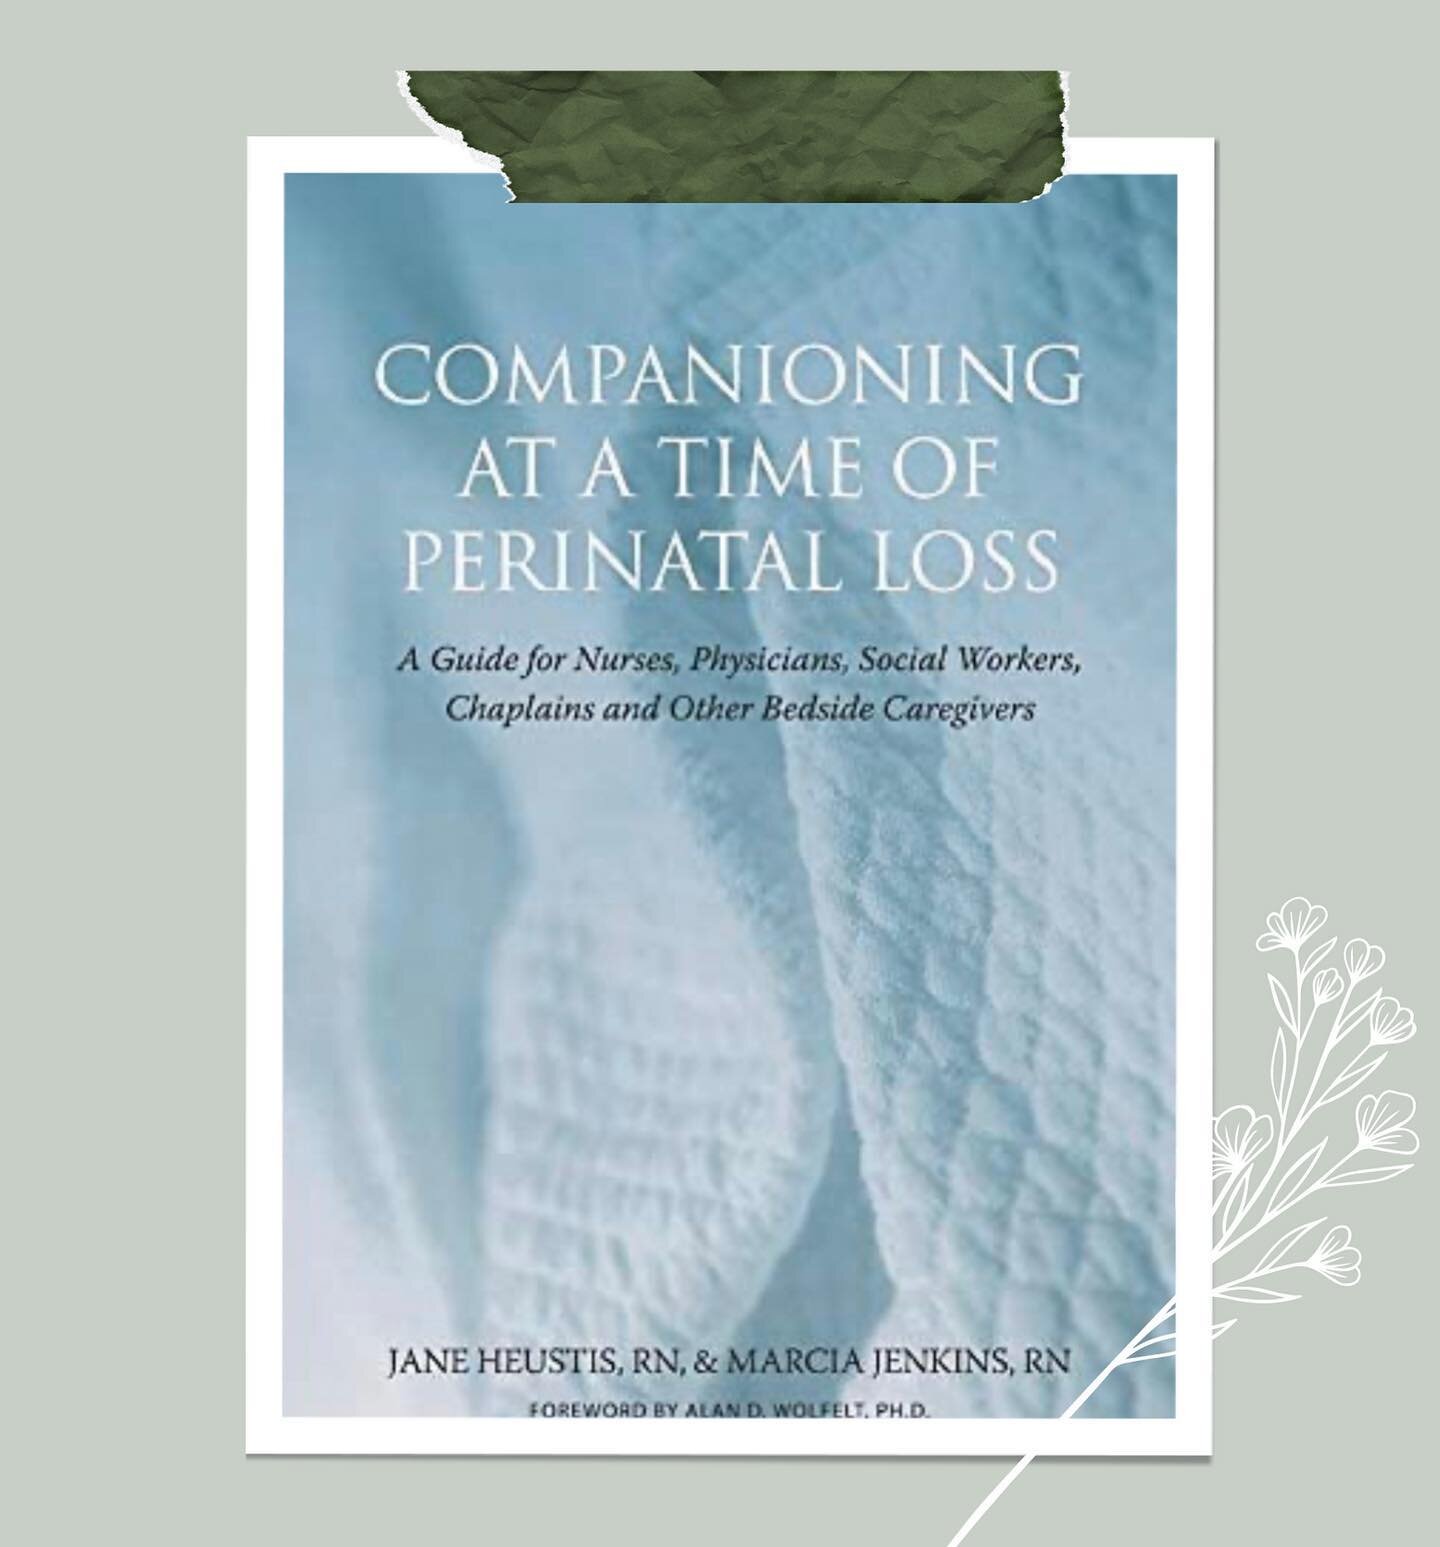 &ldquo;Companioning At A Time Of Perinatal Loss&rdquo; is a great book. It is a short read and the perfect length to teach you how to care for clients. It&rsquo;s called &ldquo;a guide for nurses.&rdquo; But it applies to all caregivers, especially d